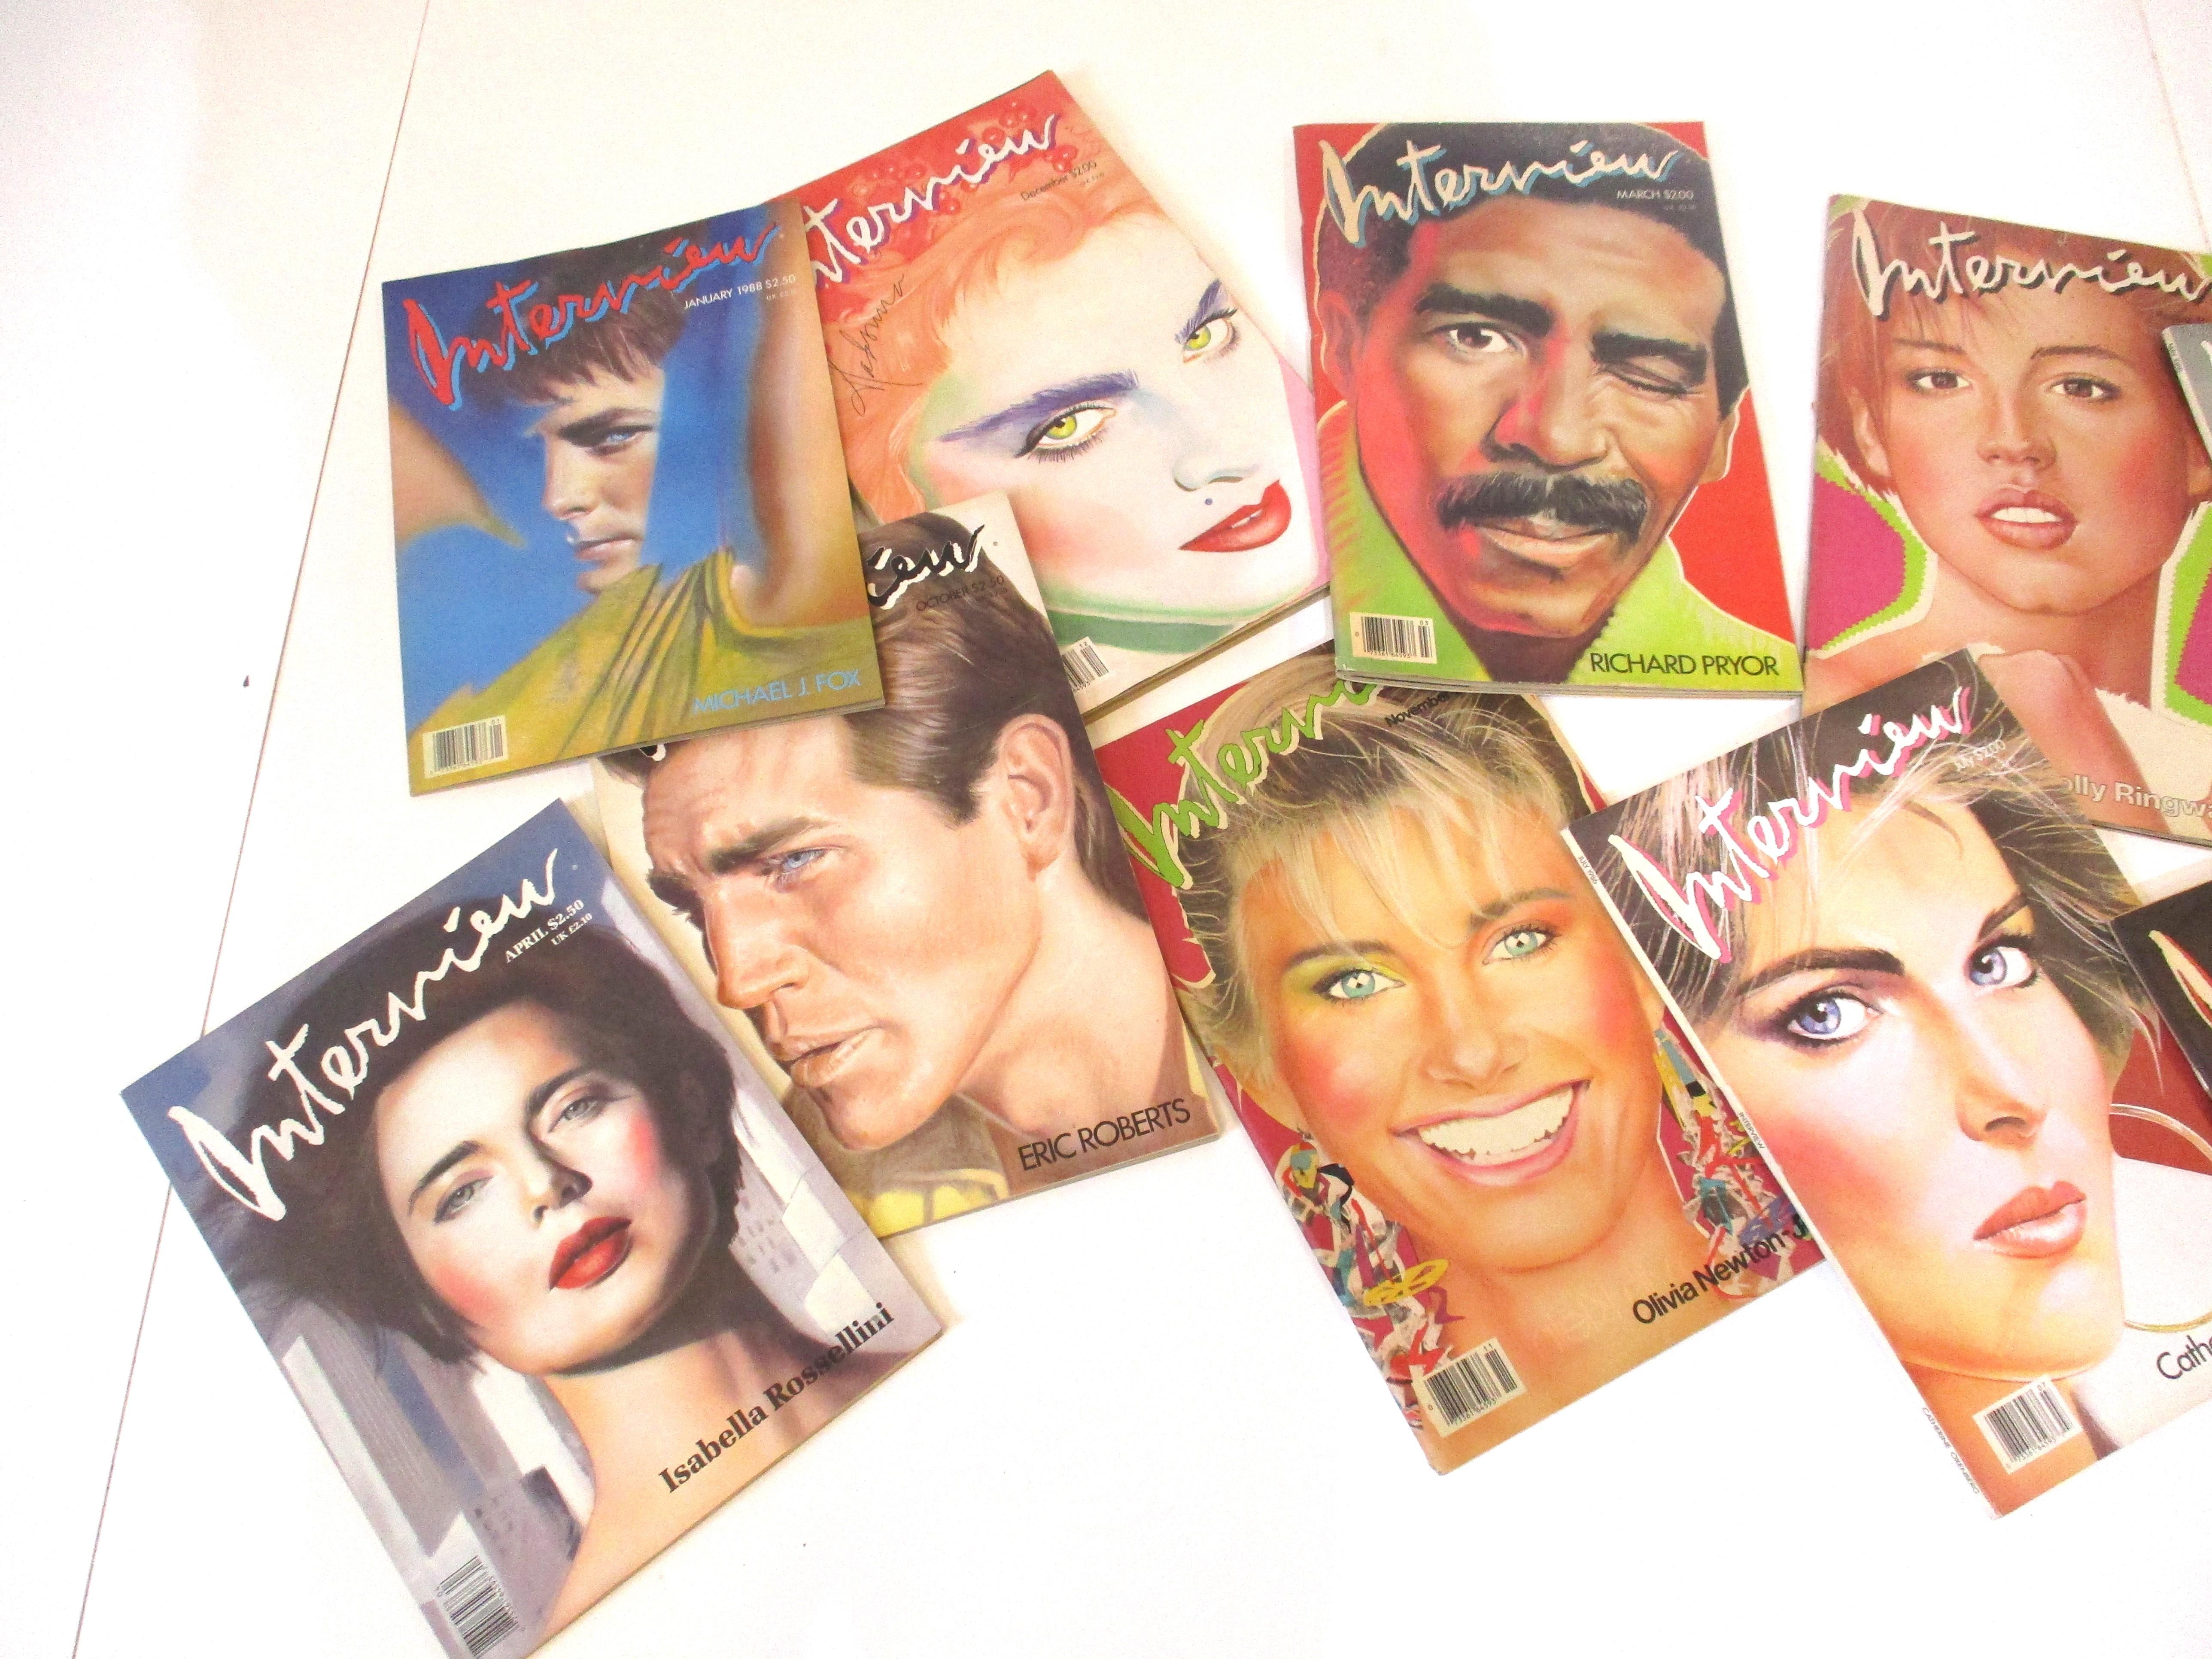 A collection of thirteen iconic interview magazines published by Andy Warhol with many portrait covers by artist Richard Bernstein.These pieces are a history of art, fashion, photography and stories depicting the go go era of the 1980s with great